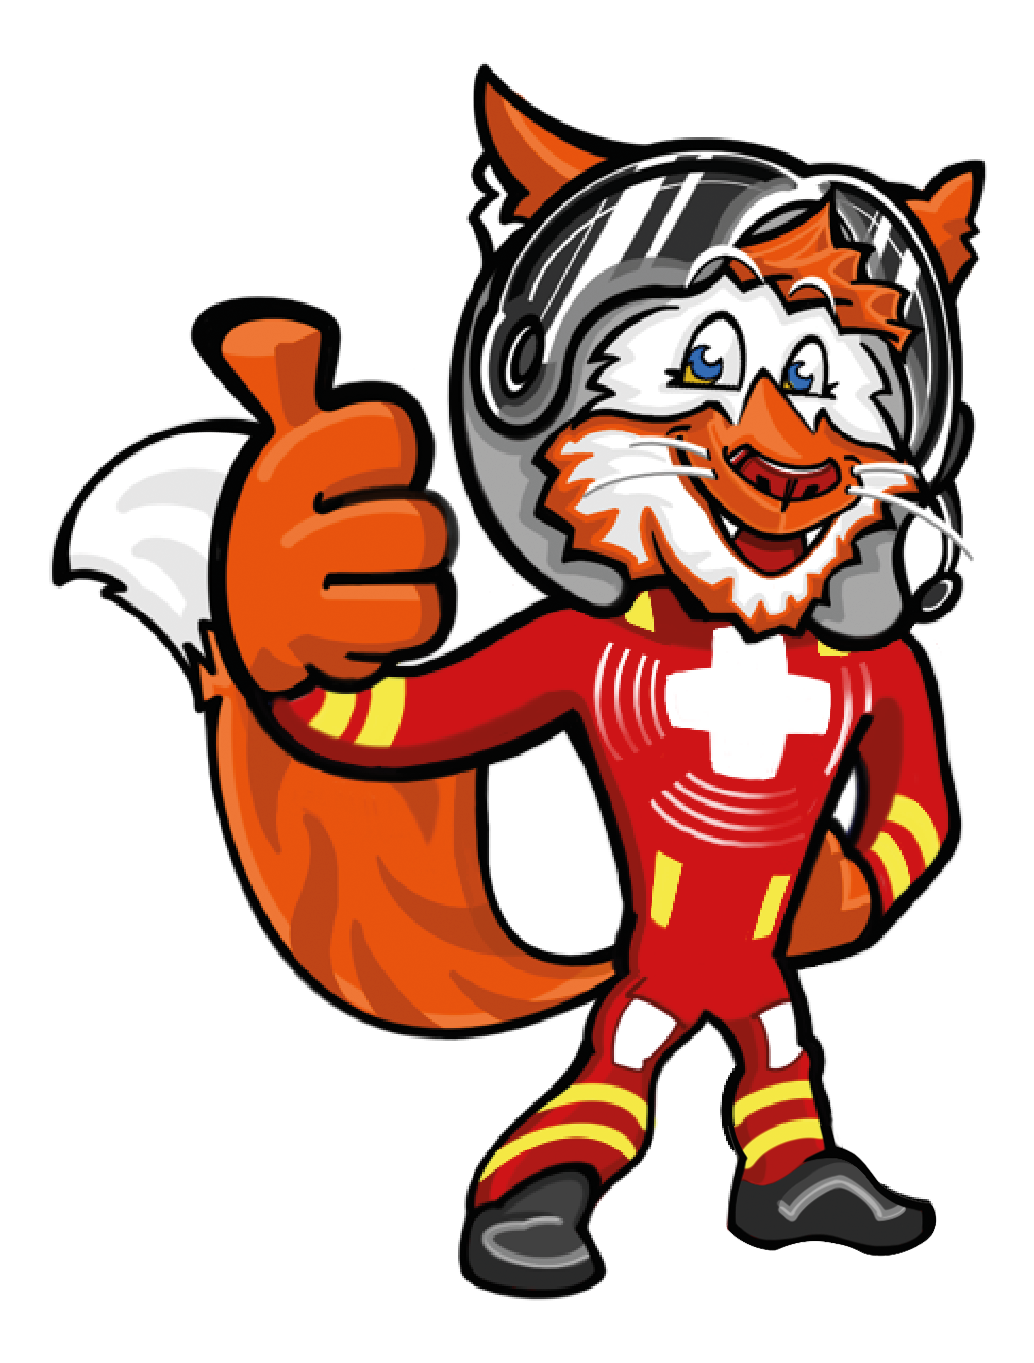 Foxtrot is a fox with a bushy tail with white tip wearing a red and yellow uniform and a helmet